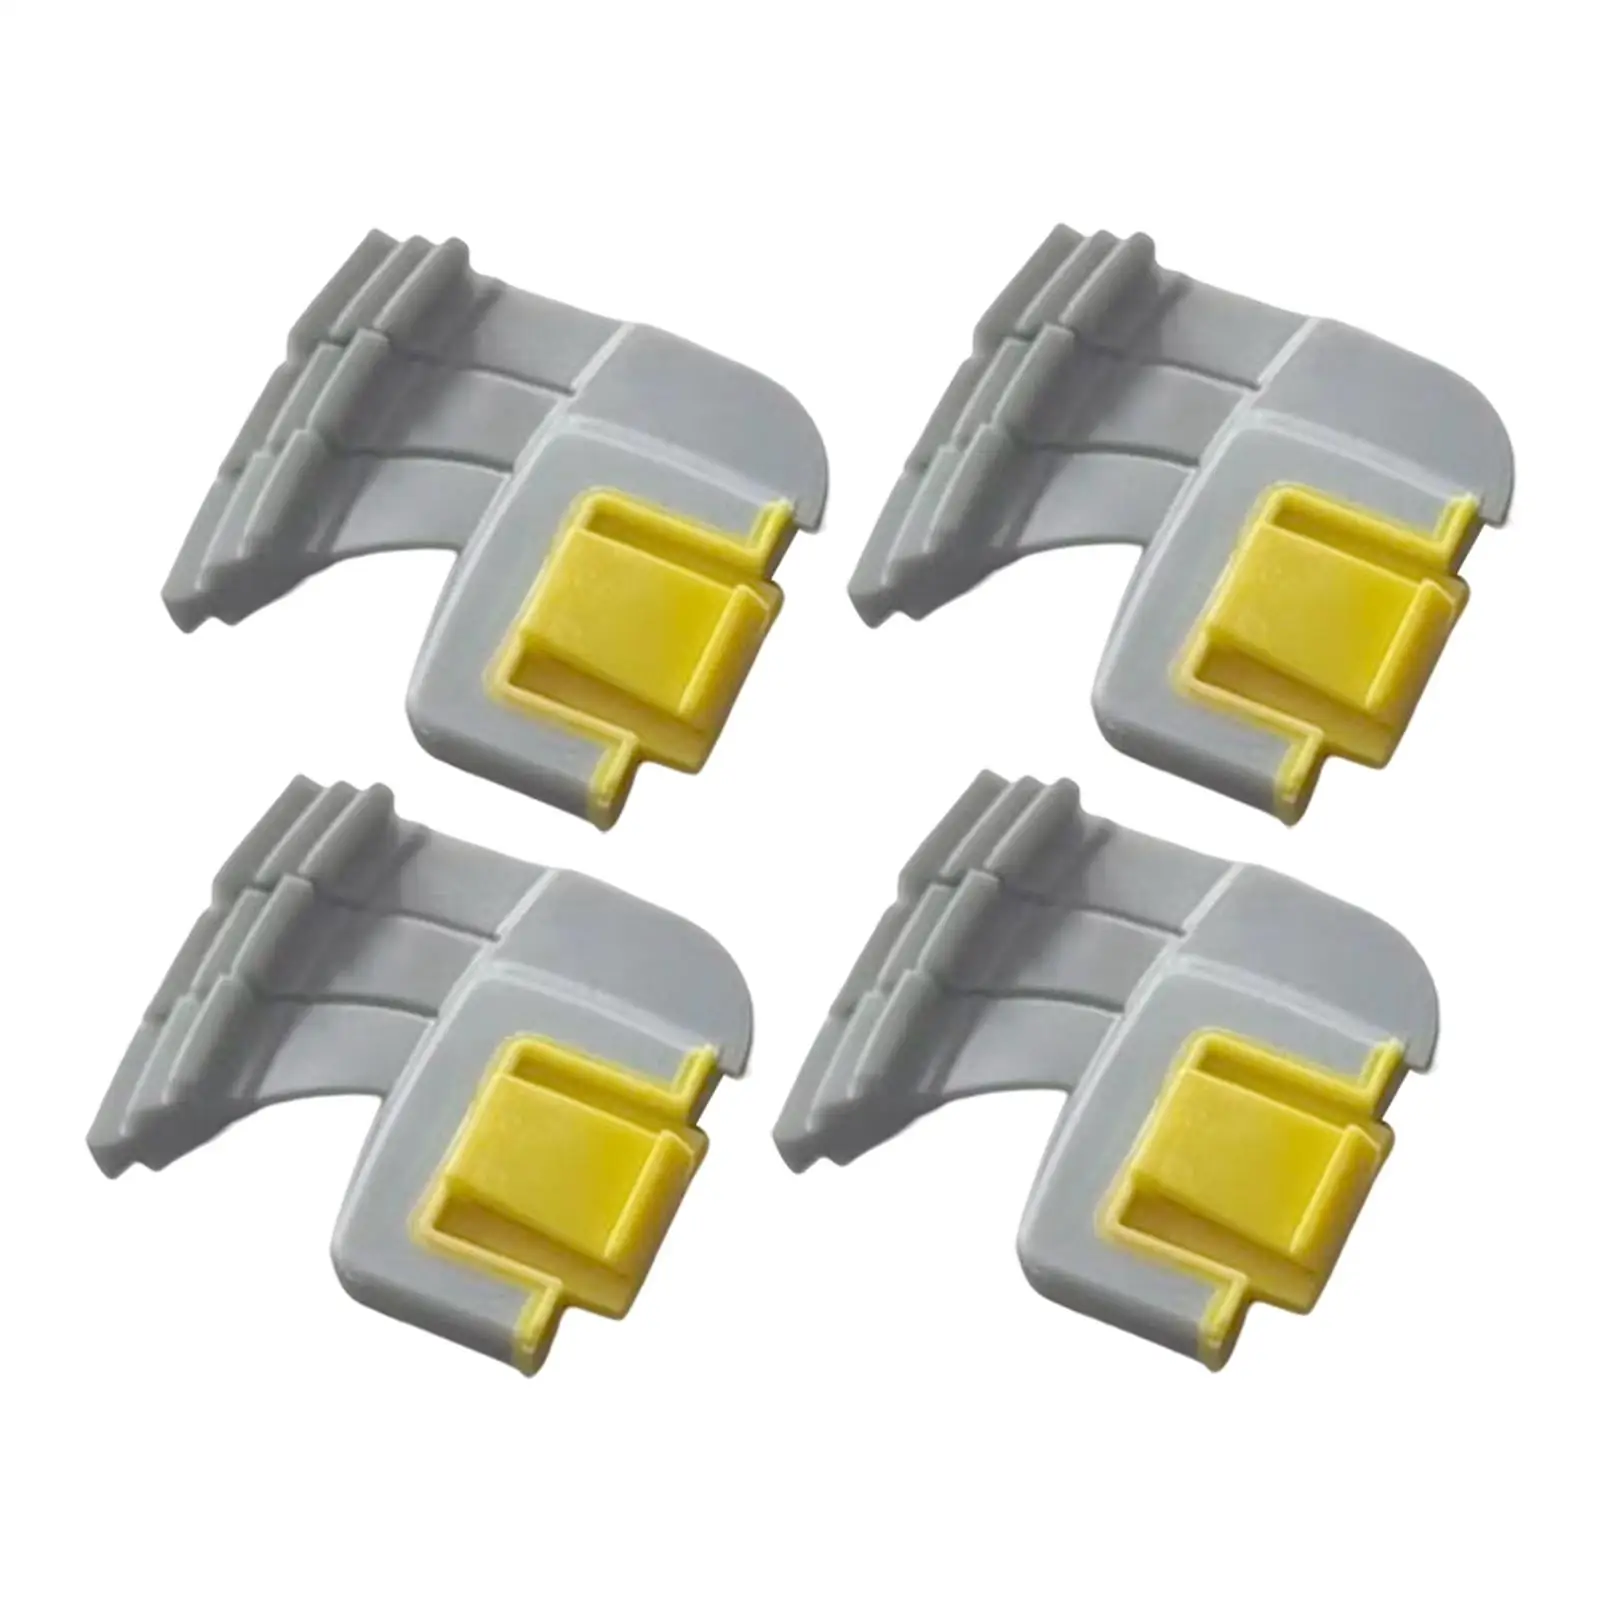 4x Cyclonic Scrubbing Brush Pool Brush Replacement Parts for R0714400 Suction Robotic Pool Cleaner Accessories